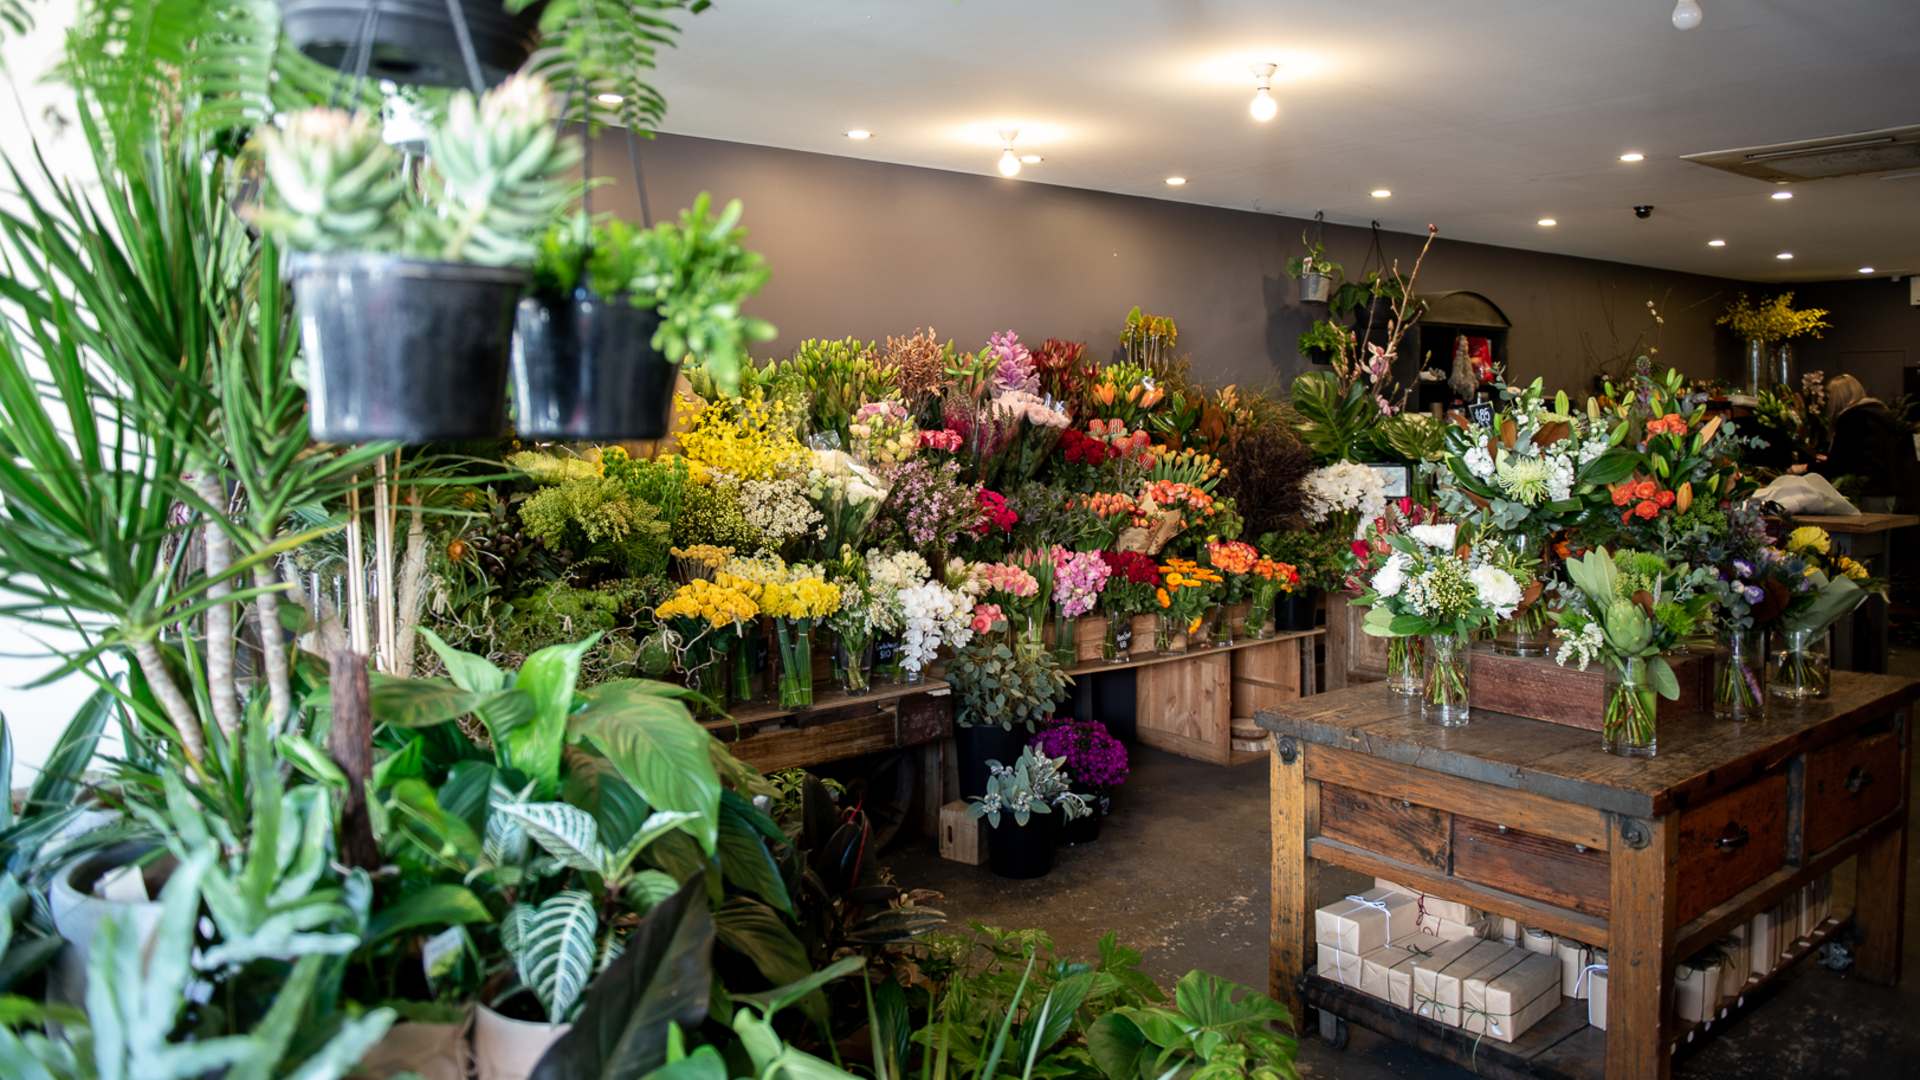 Where to Shop Like a Local In and Around Elwood